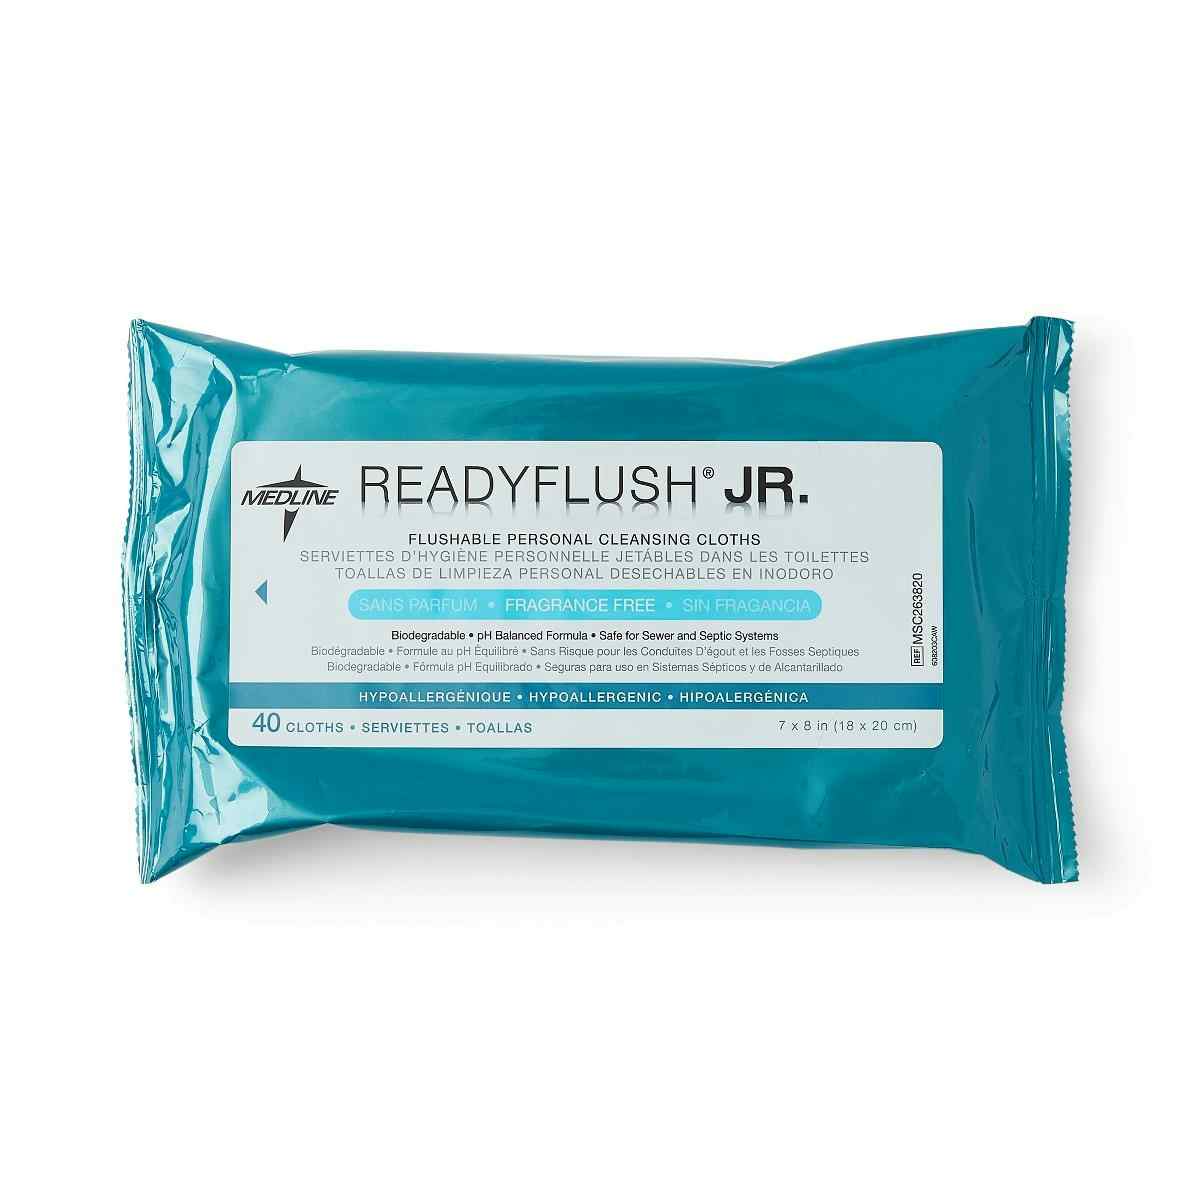 ReadyFlush Jr. Flushable Personal Cleansing Wipes